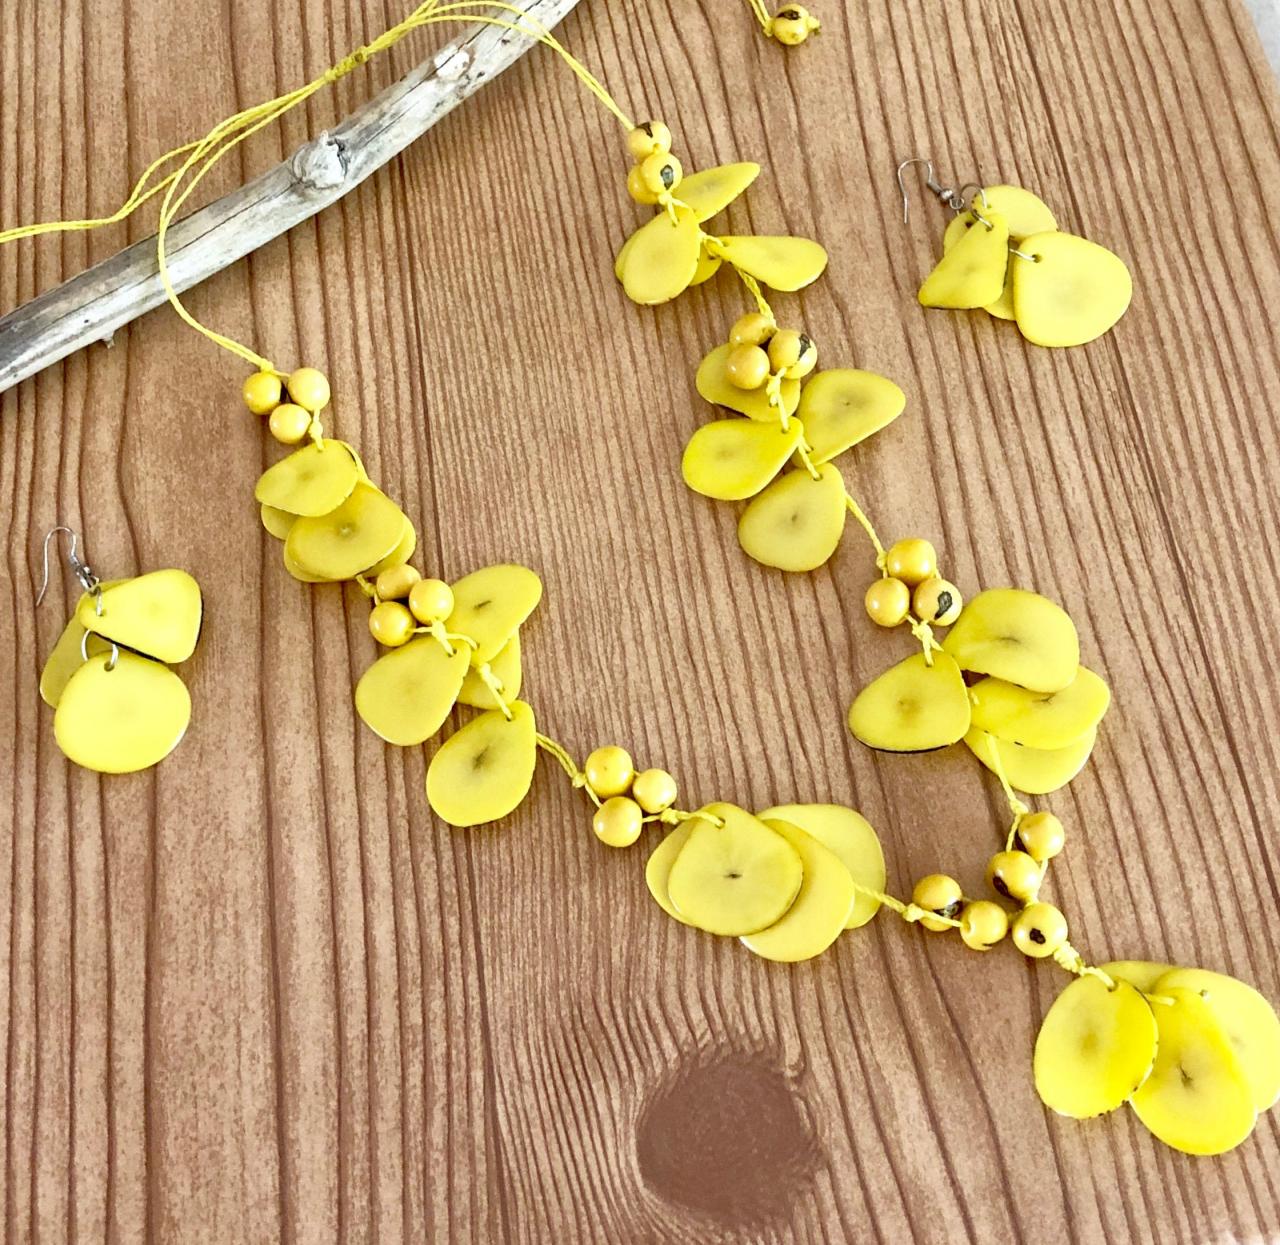 Yellow Necklace And Earrings, Long Necklace, Statement Necklace, Handmade Necklace Exotic Necklace, Summery Necklace, Tagua Necklace, Seeds